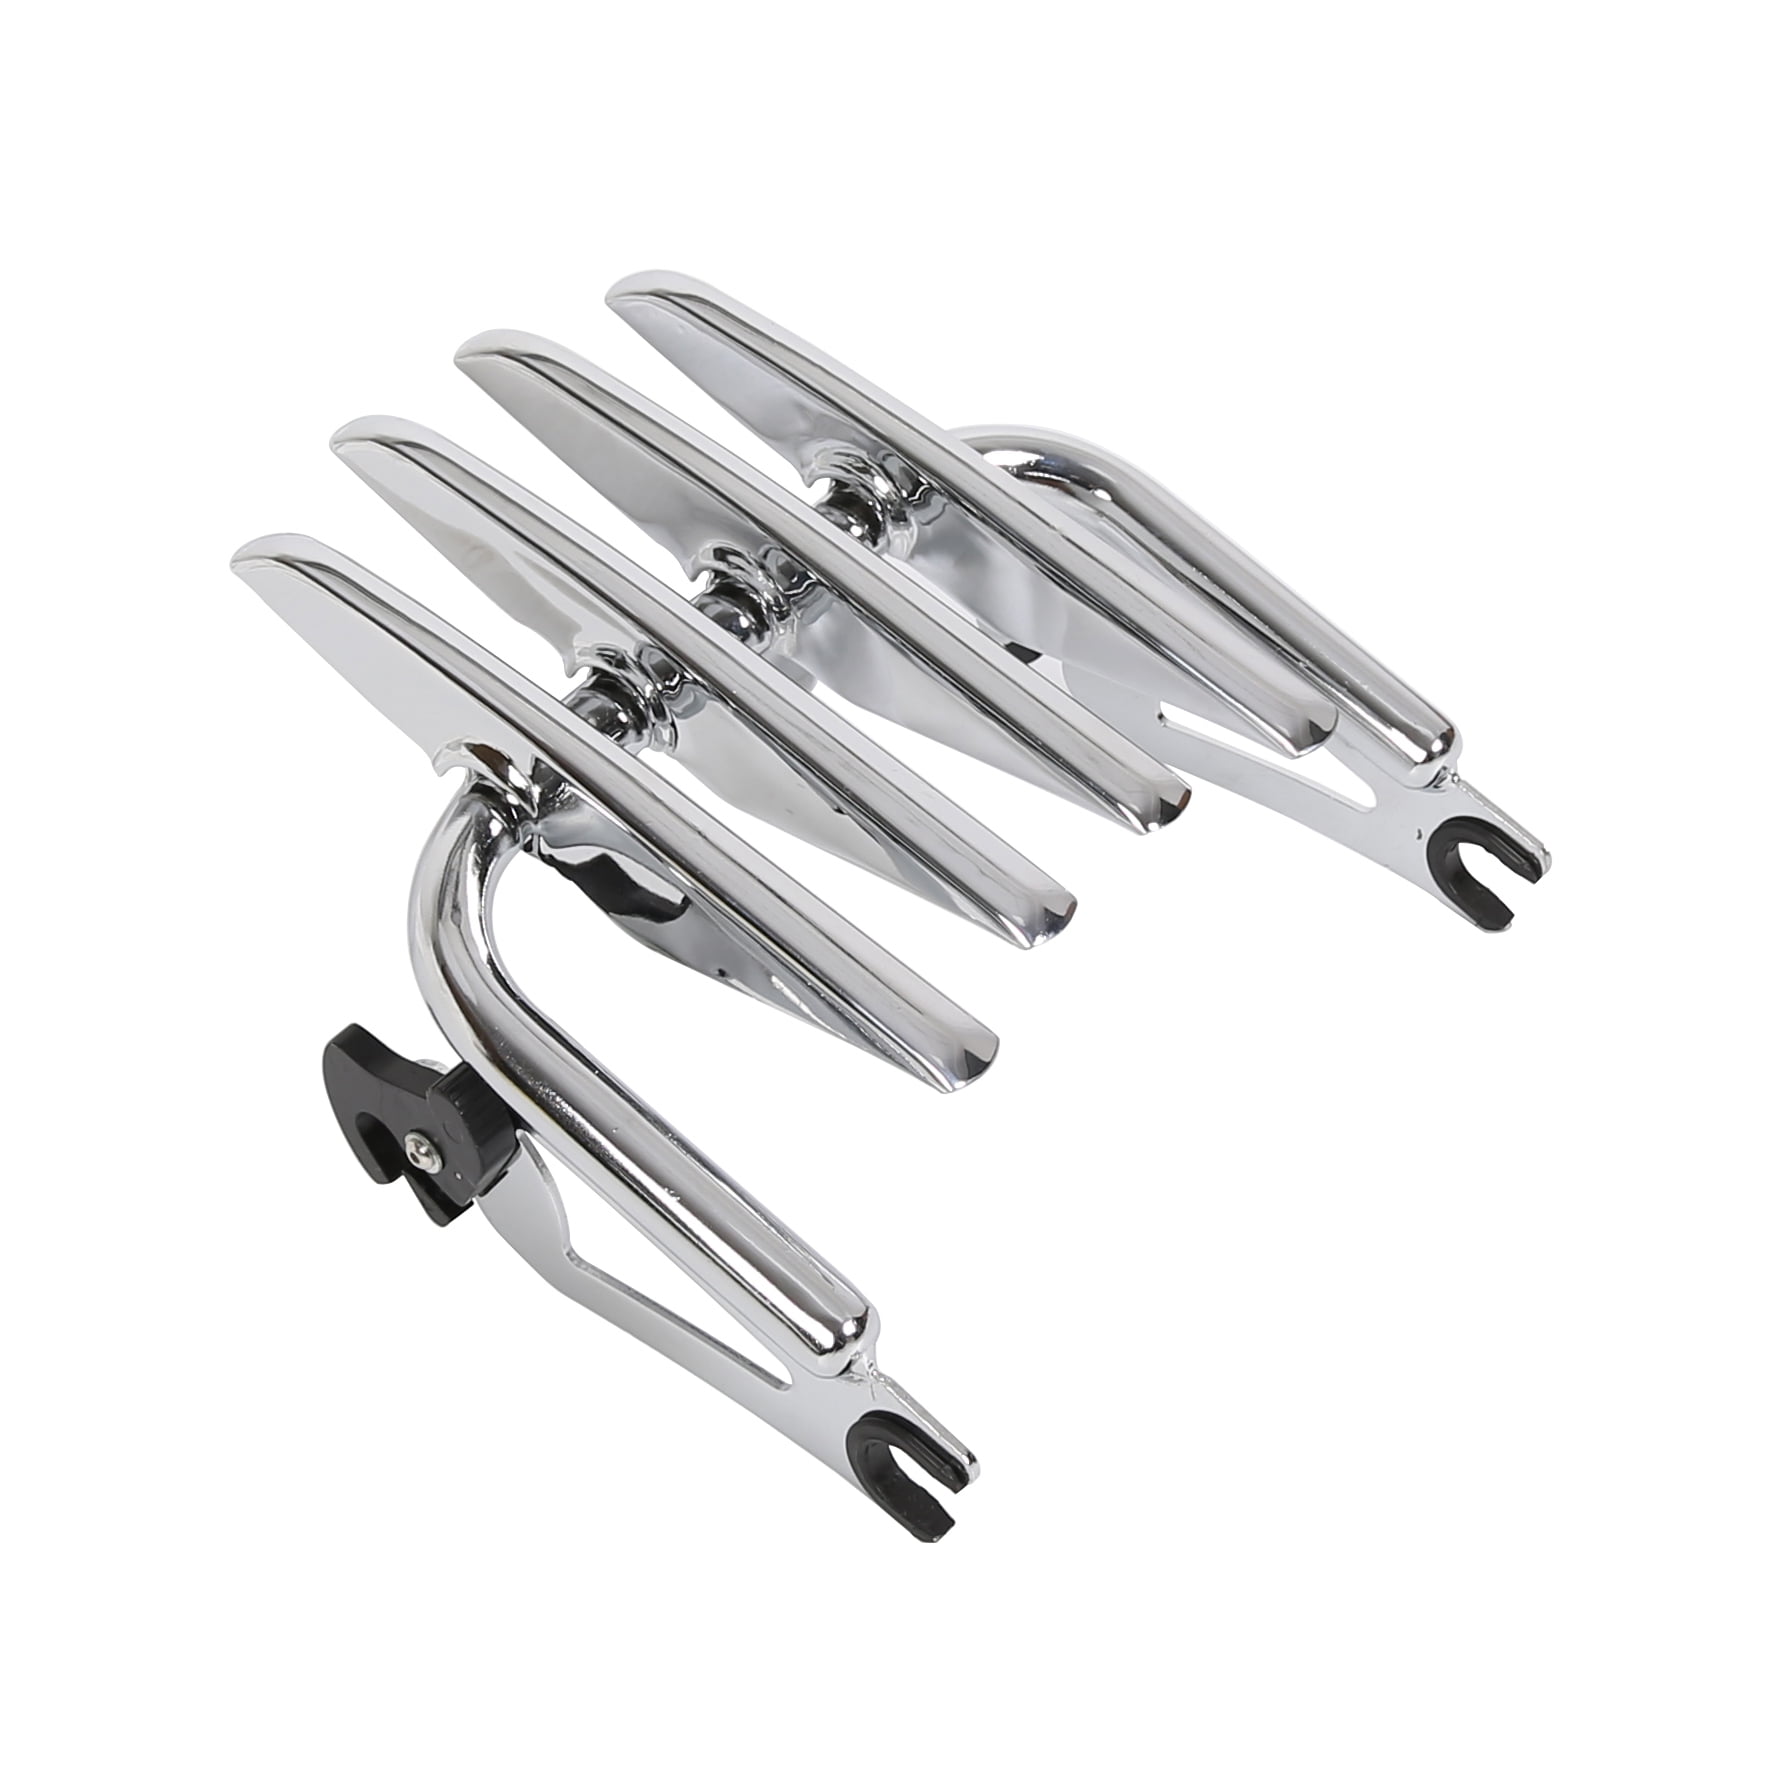 Gofavorland Detachable Stealth Luggage Rack Chrome for 2009-2020 Harley Touring Road King Glide 